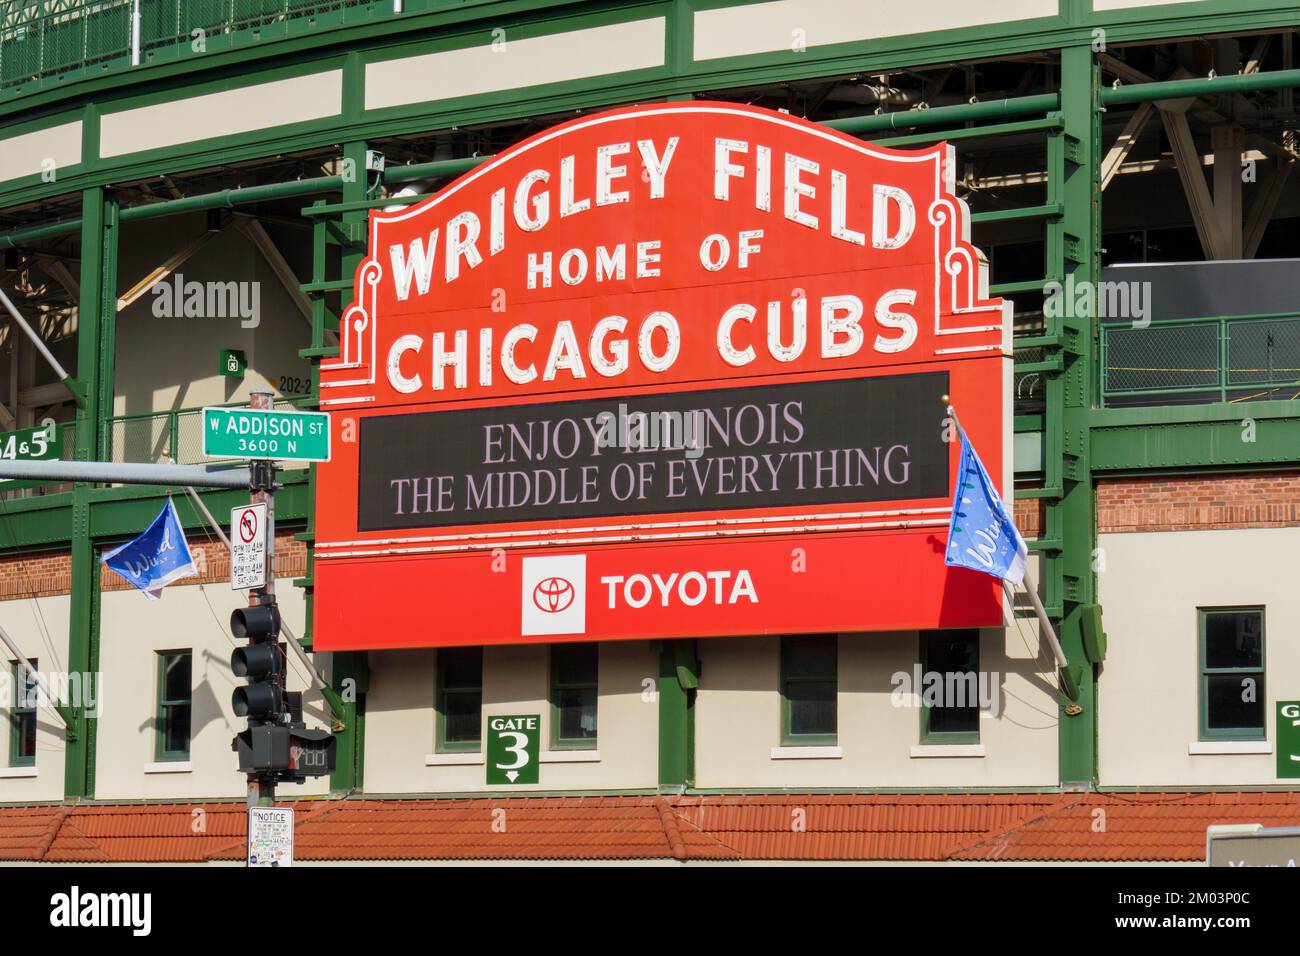 Wrigley Field sign. Clark and Addison streets, Chicago, Illinois. Stock Photo